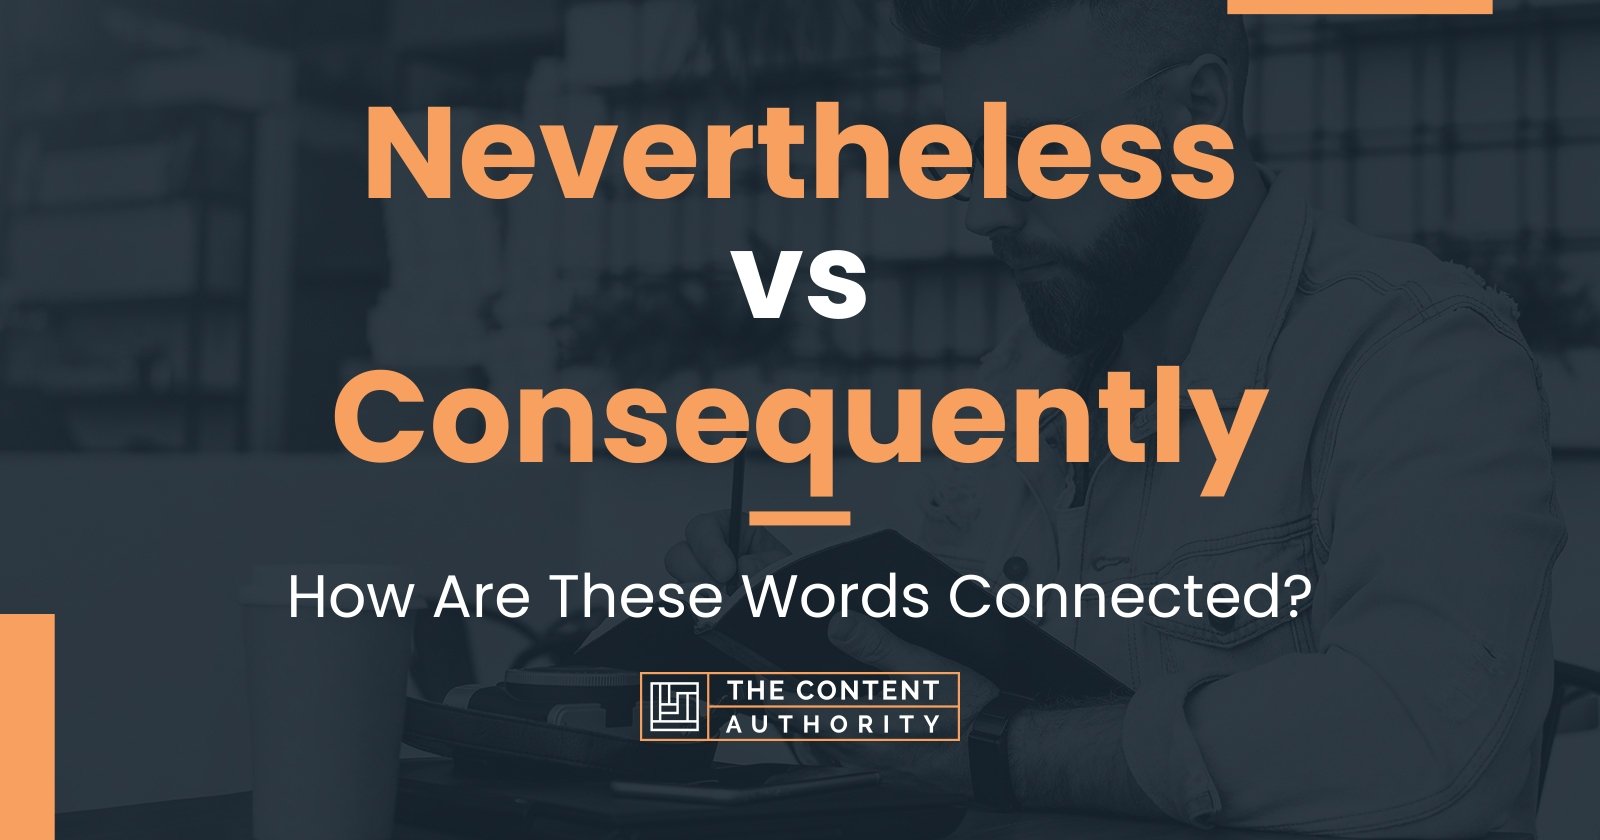 Nevertheless vs Consequently: How Are These Words Connected?